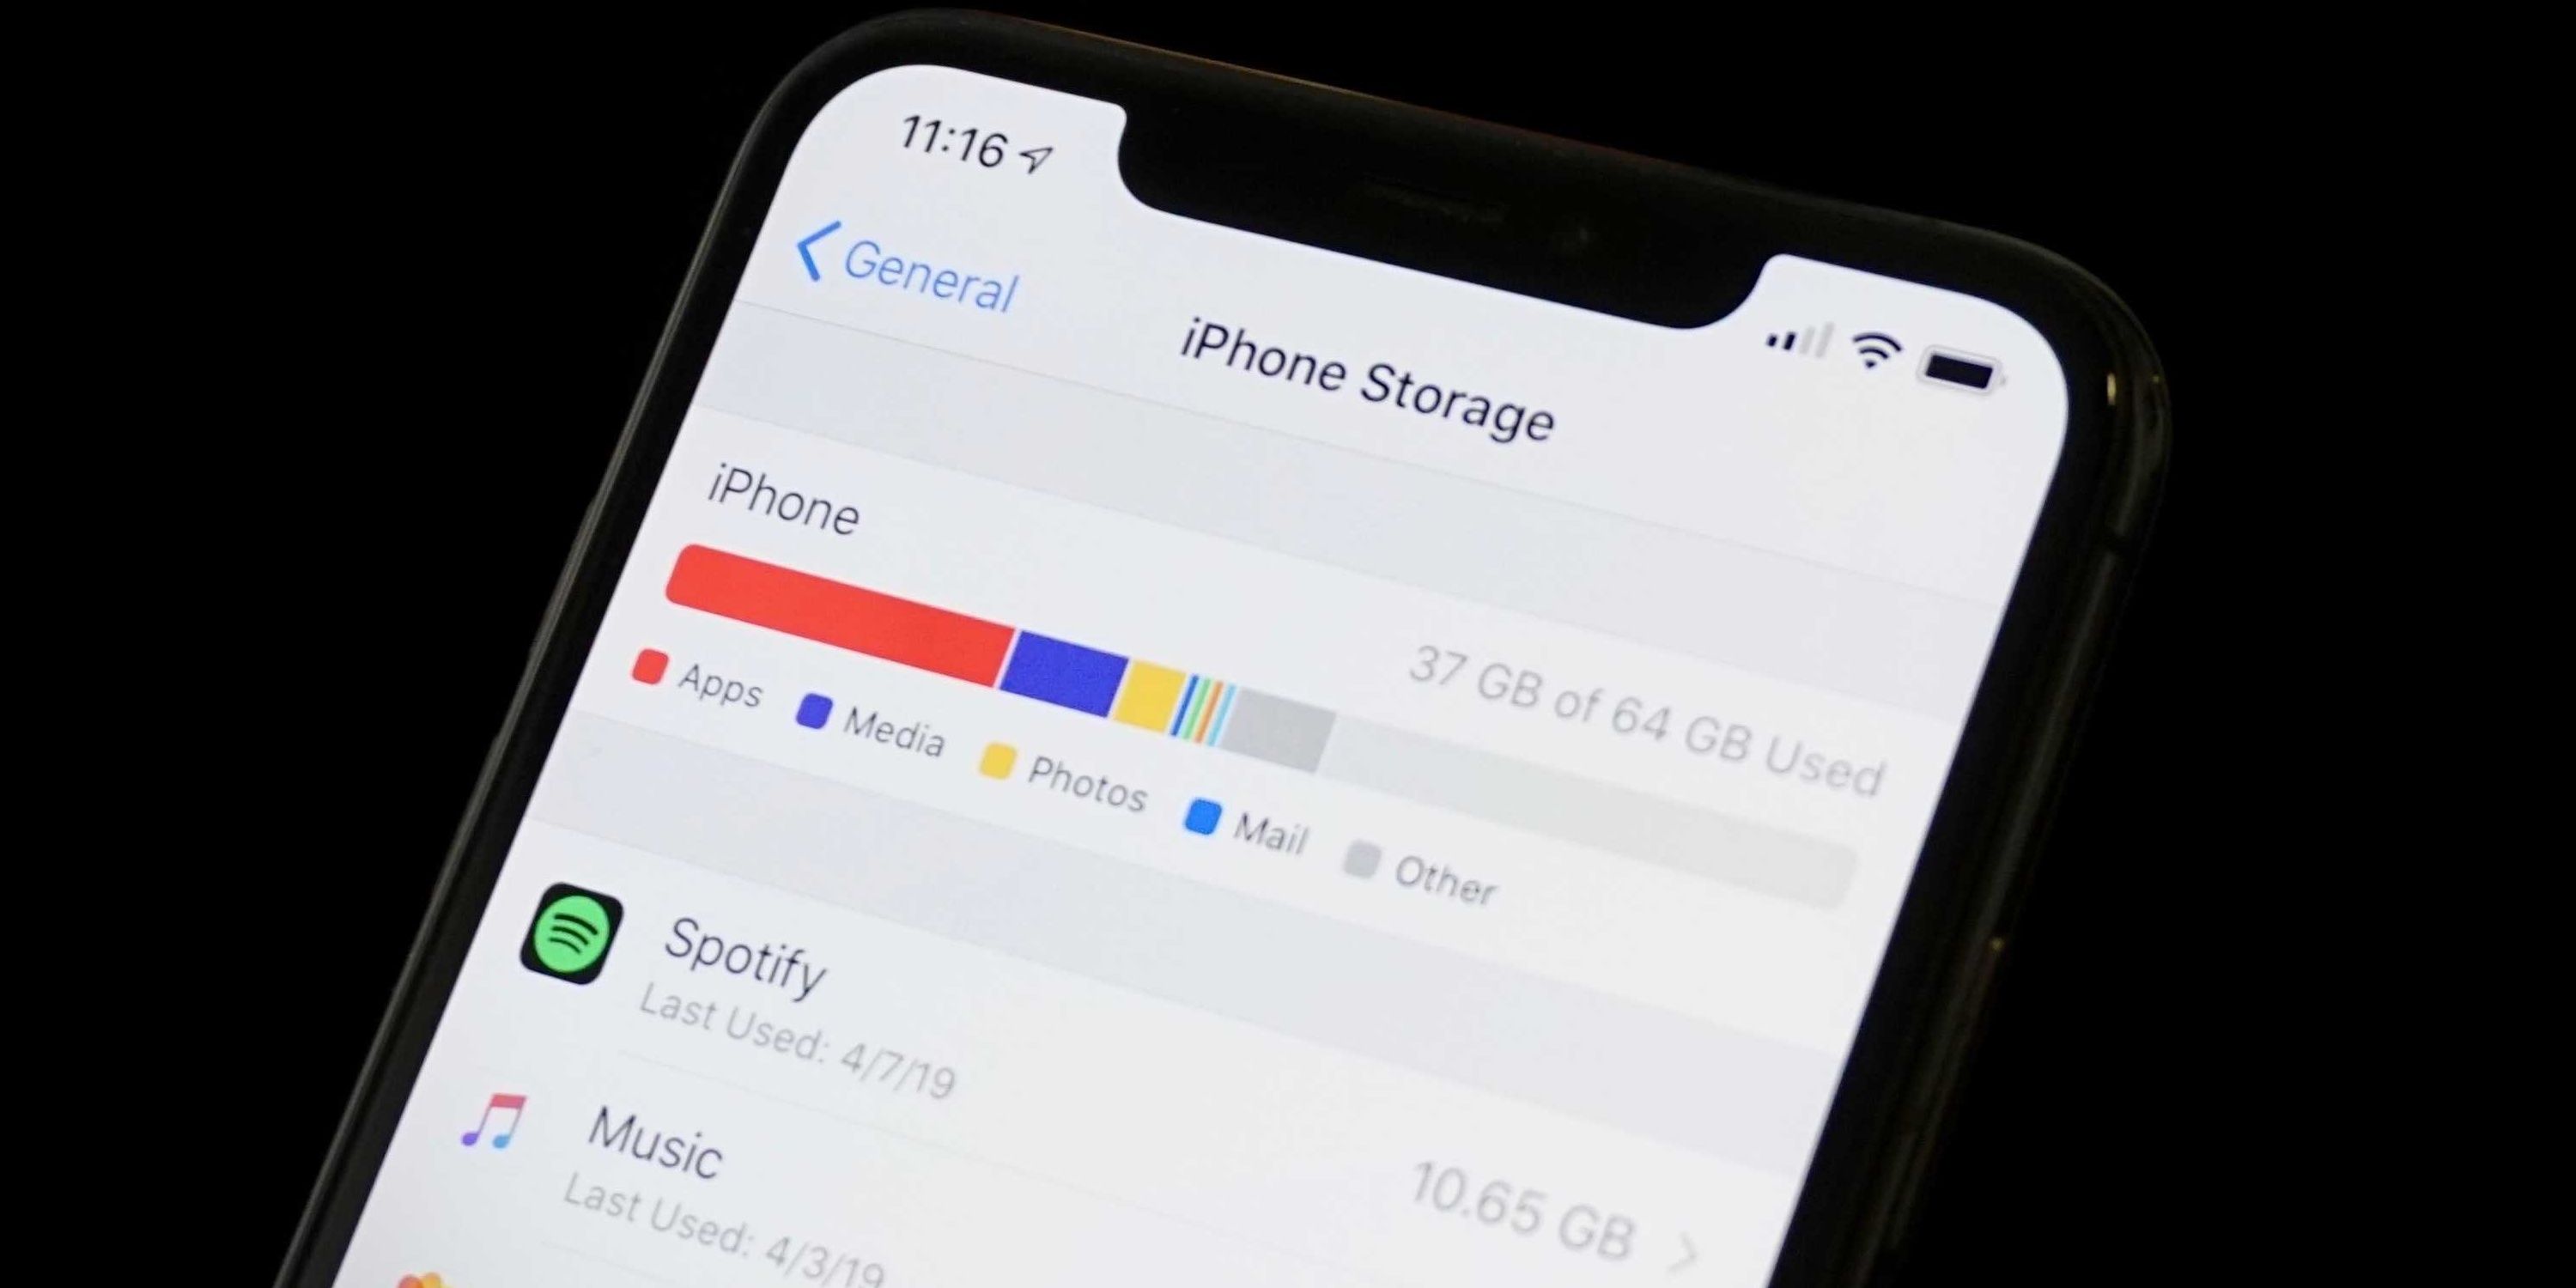 The iPhone showing which apps are being used in storage